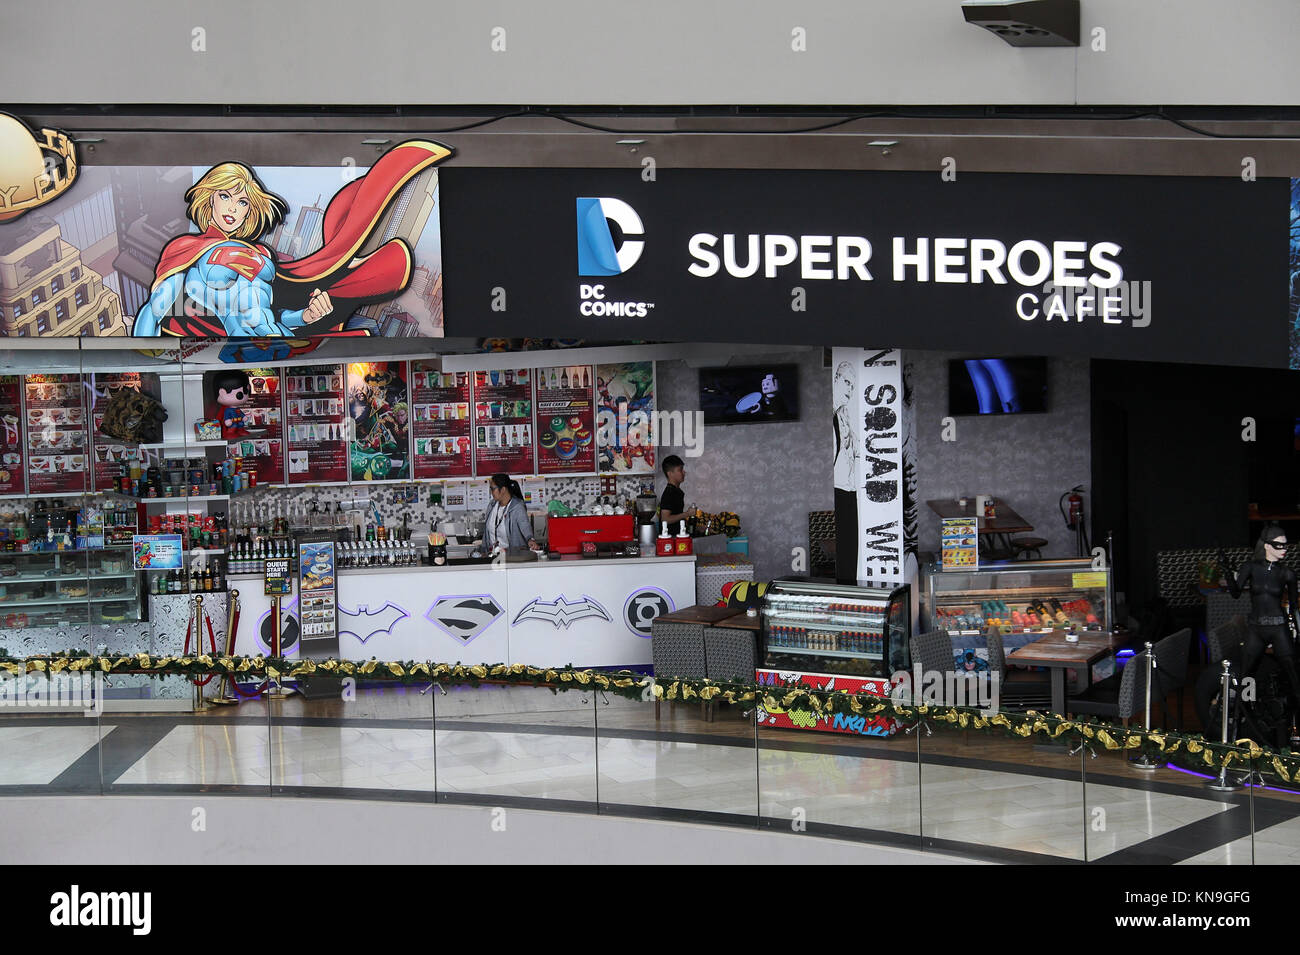 DC Comics Super Heroes Cafe at The Shoppes Marina Bay Sands shopping mall Stock Photo